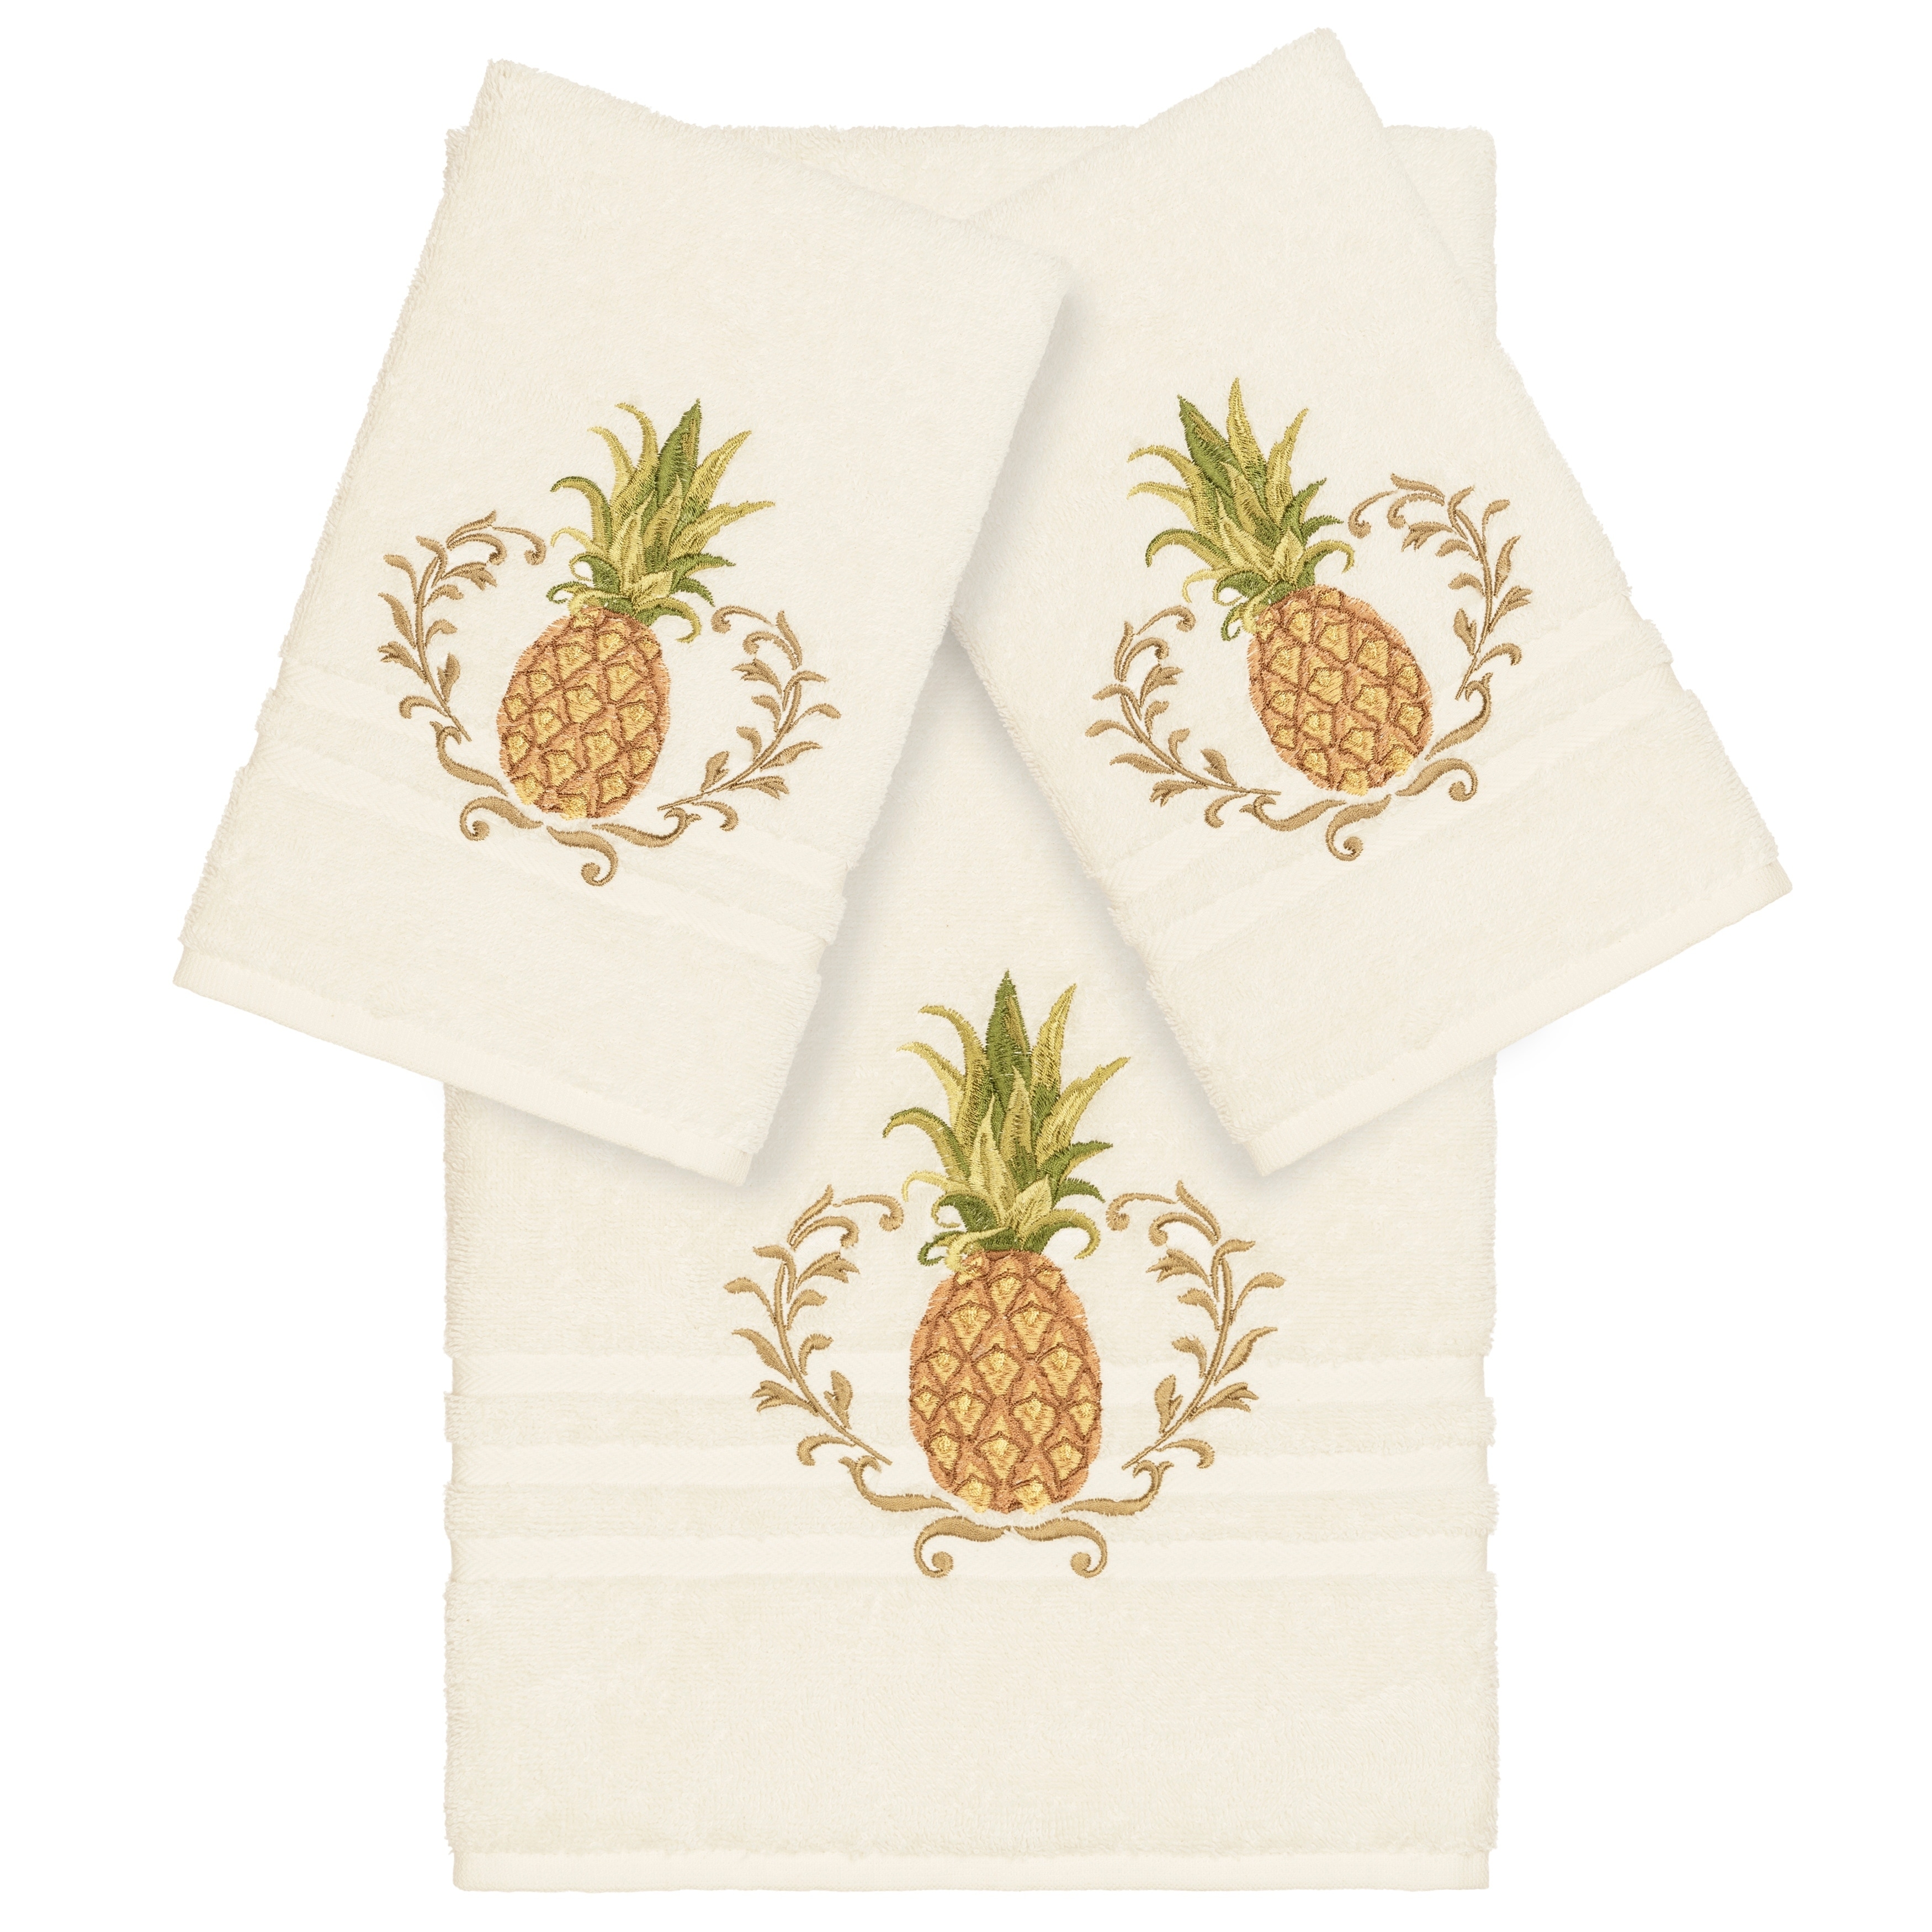 https://ak1.ostkcdn.com/images/products/22679954/Authentic-Hotel-and-Spa-Turkish-Cotton-Pineapple-Embroidered-Cream-3-piece-Towel-Set-53b21aa1-0d50-4db9-896f-c56c3c8968b7.jpg